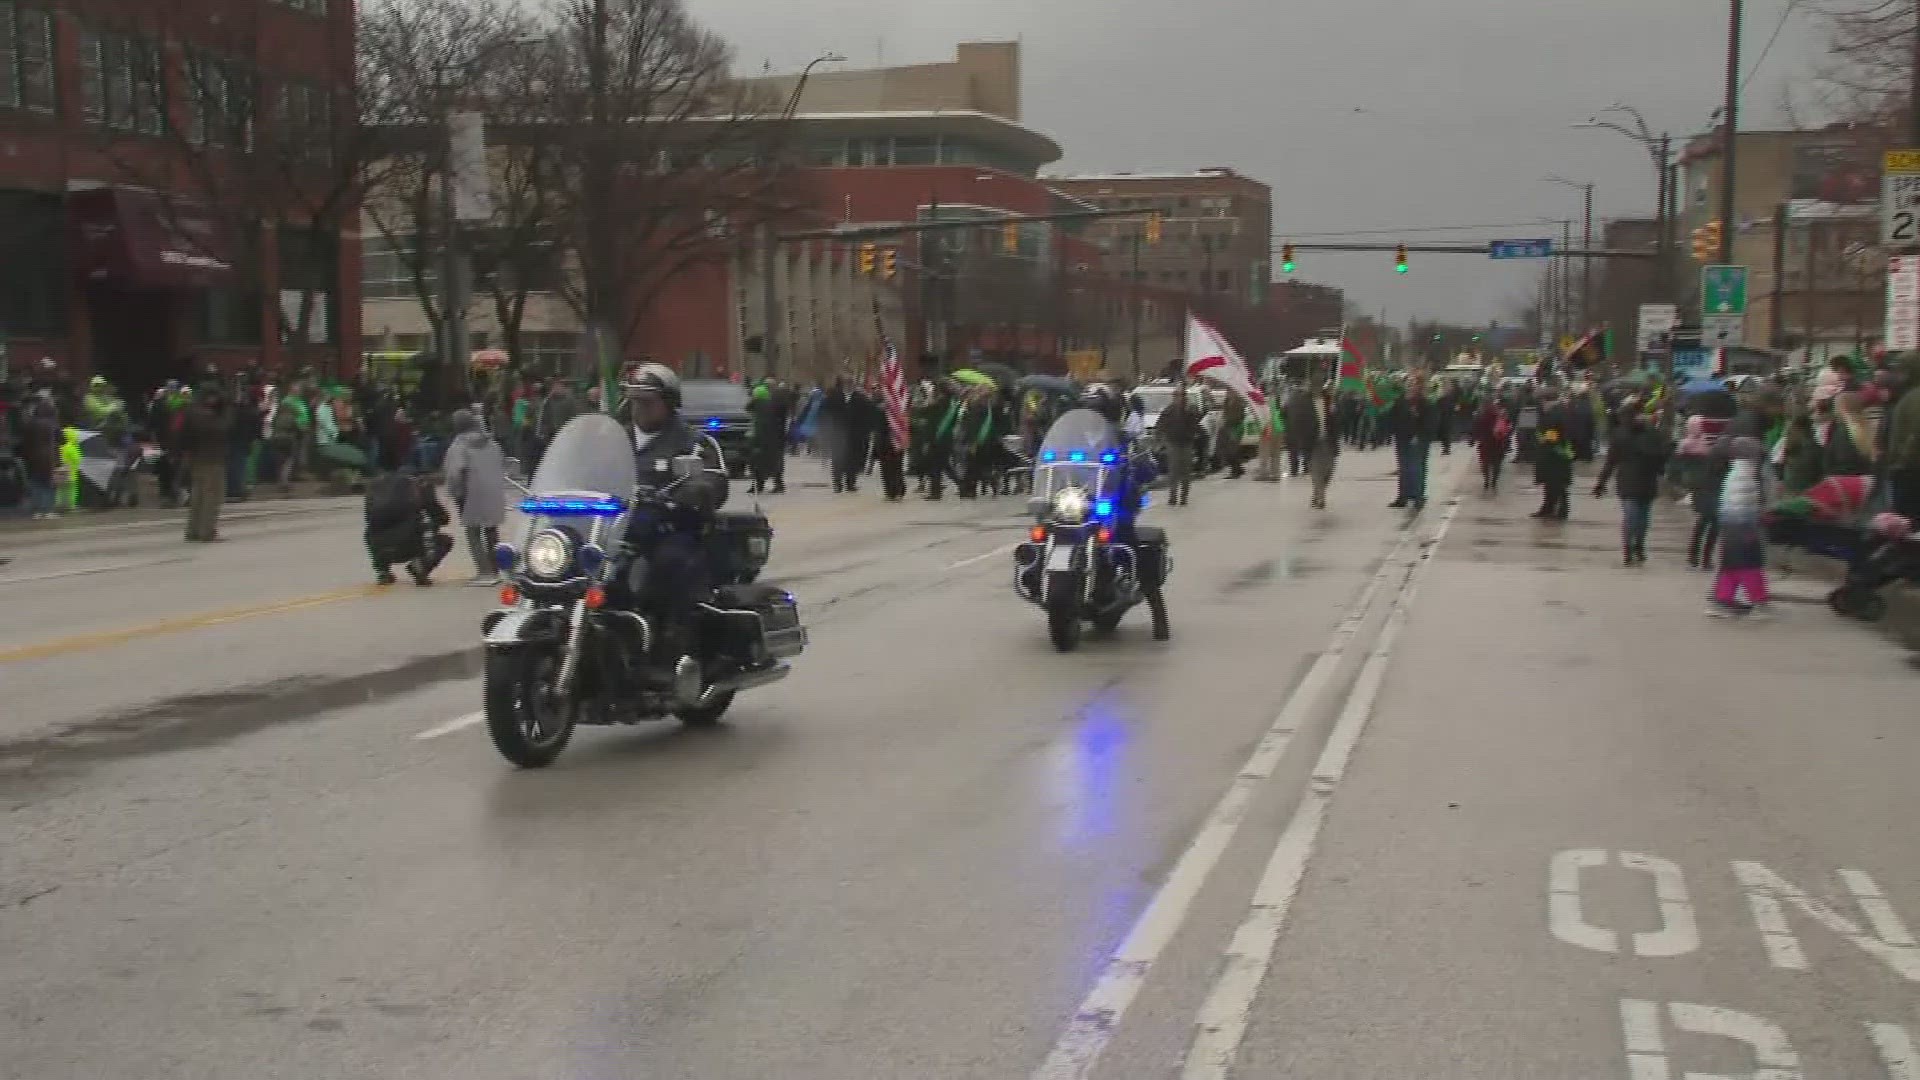 Cleveland's St. Patrick's Day Parade is a tradition that dates back more than 175 years.